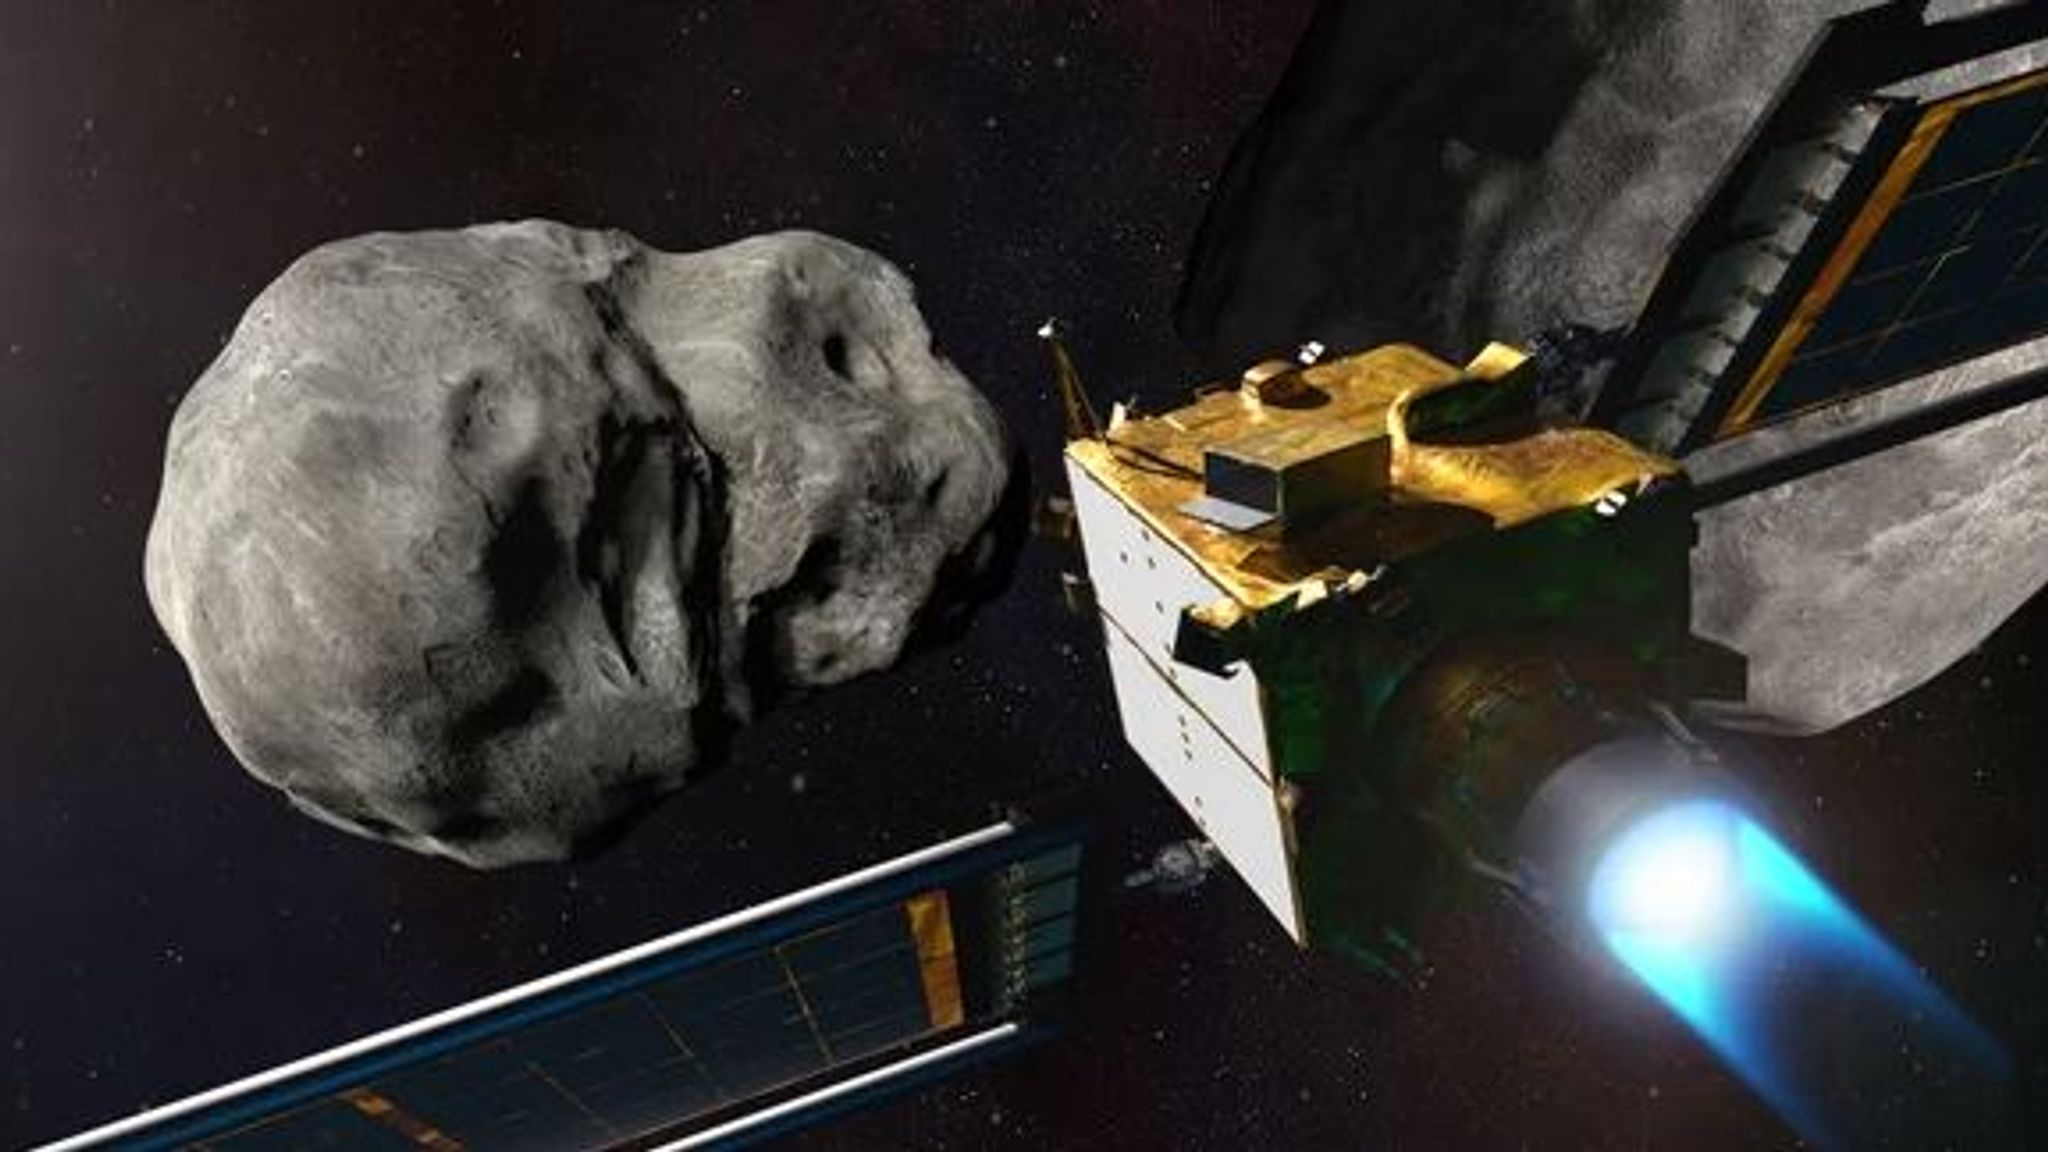 Why NASA is crashing a spacecraft into a harmless asteroid at 14,000mph tonight